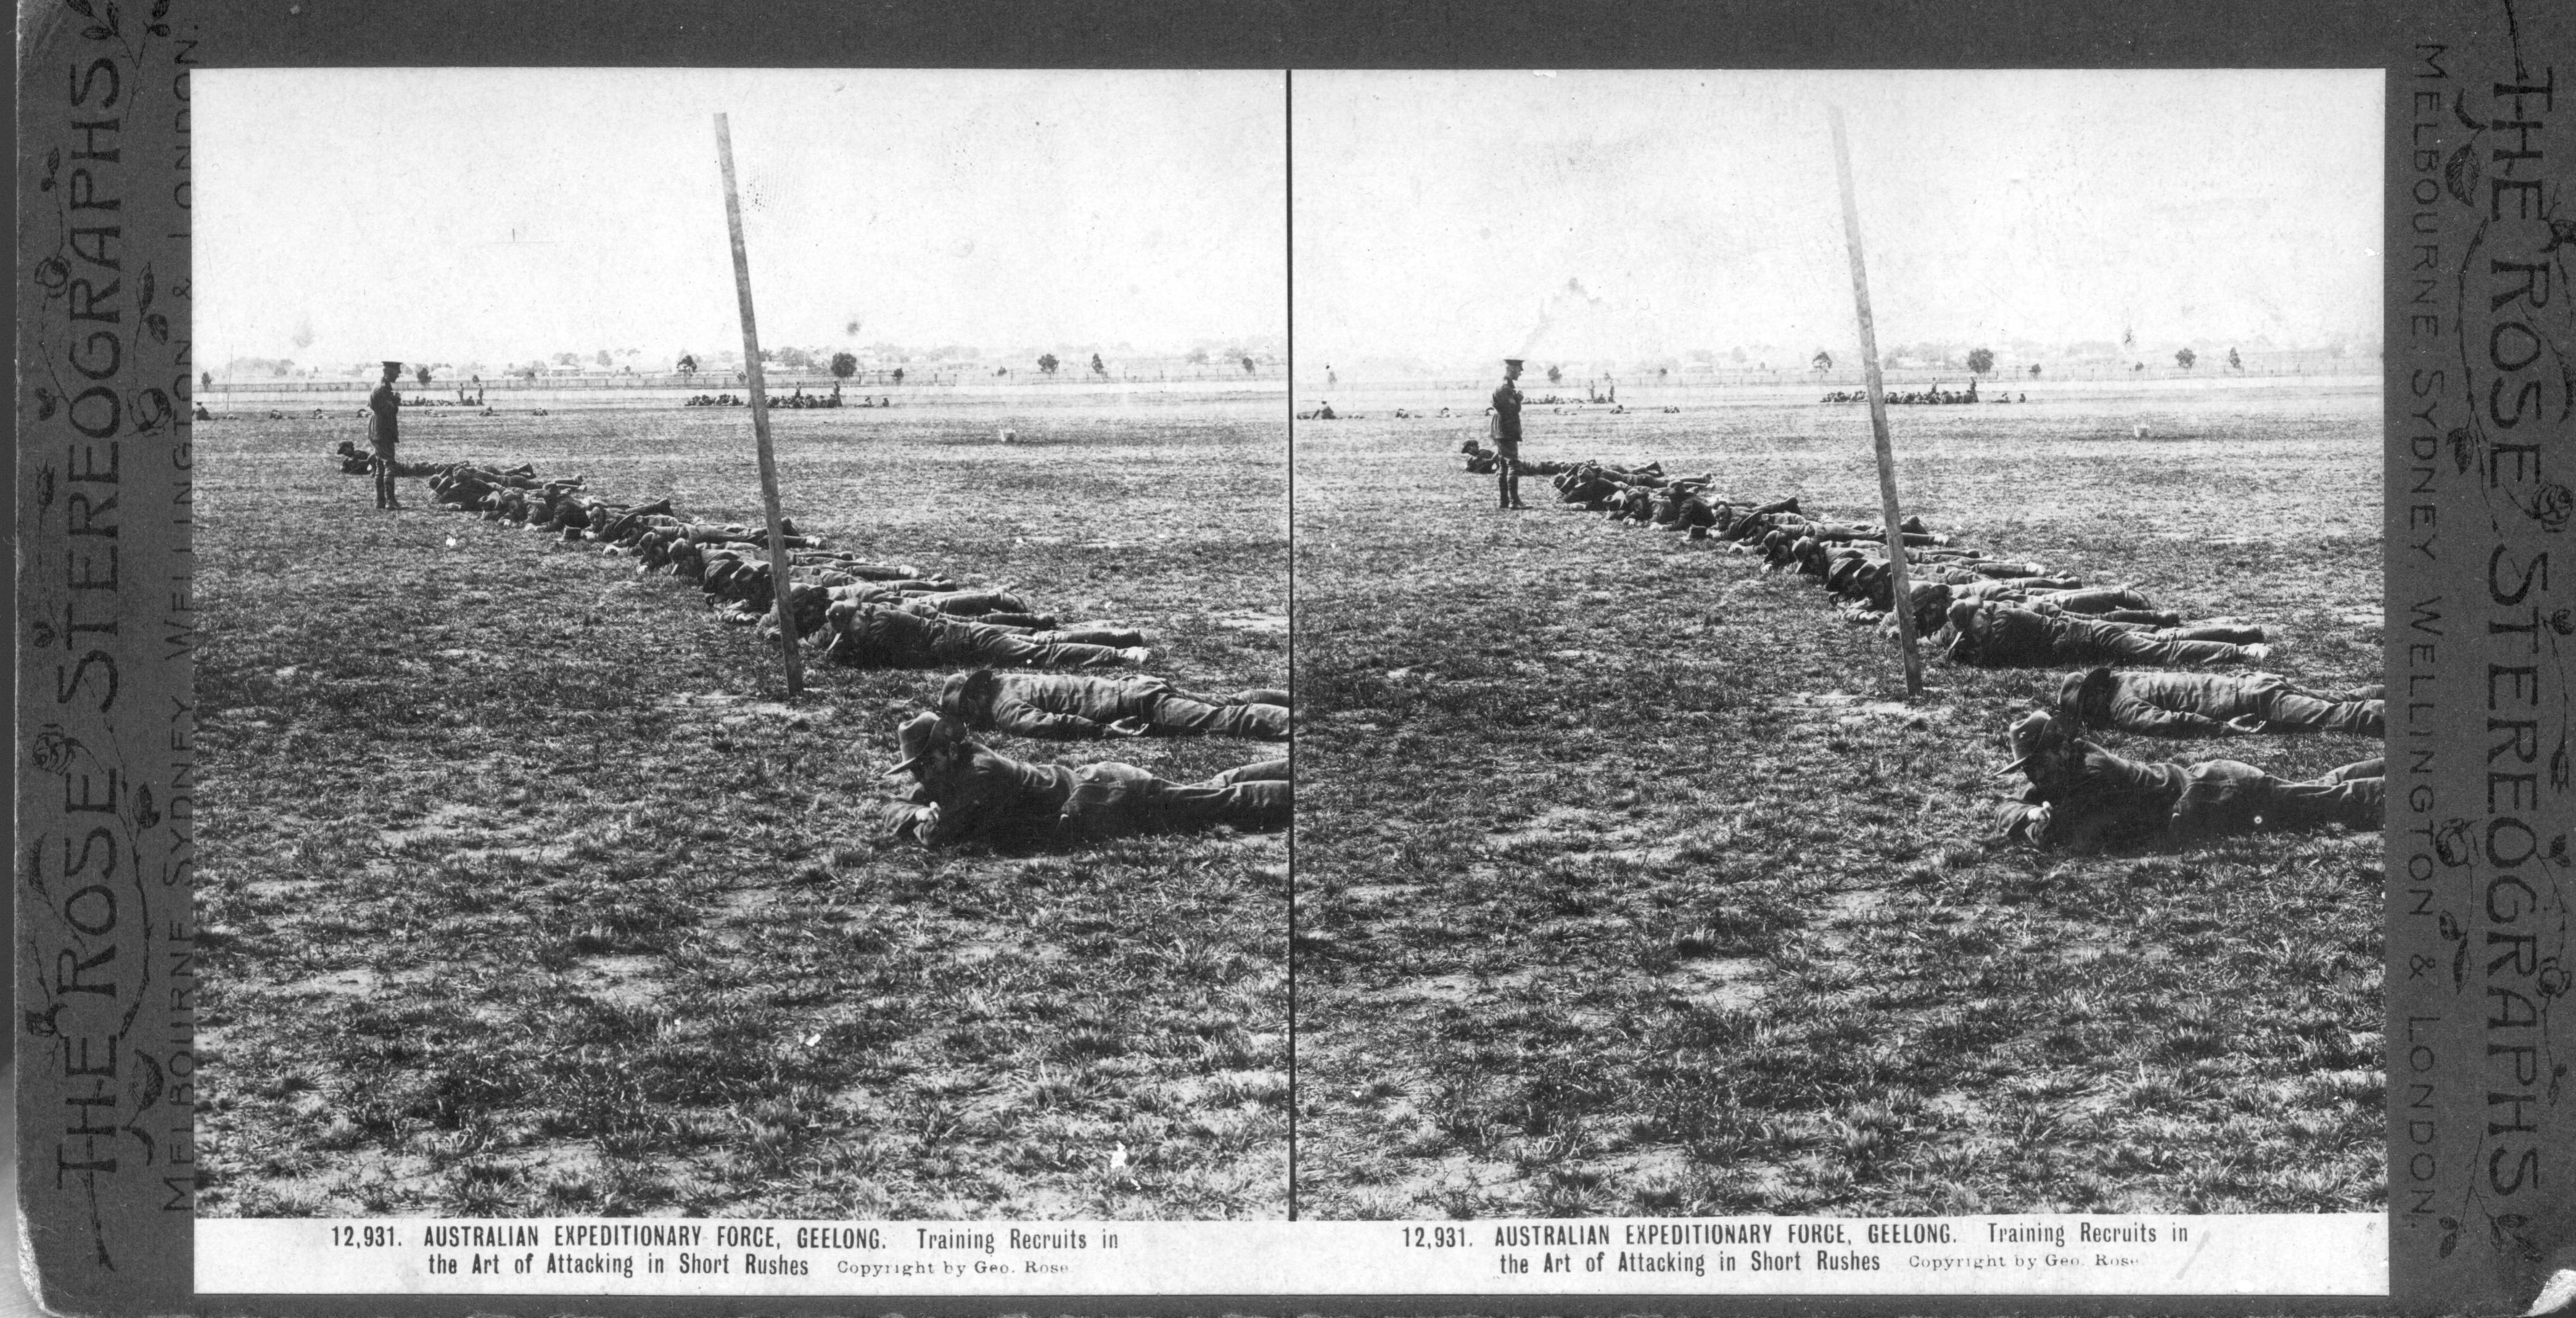 AUSTRALIAN EXPEDITIONARY FORCE, GEELONG. Training Recruits in the Art of Attacking in Short Rushes.